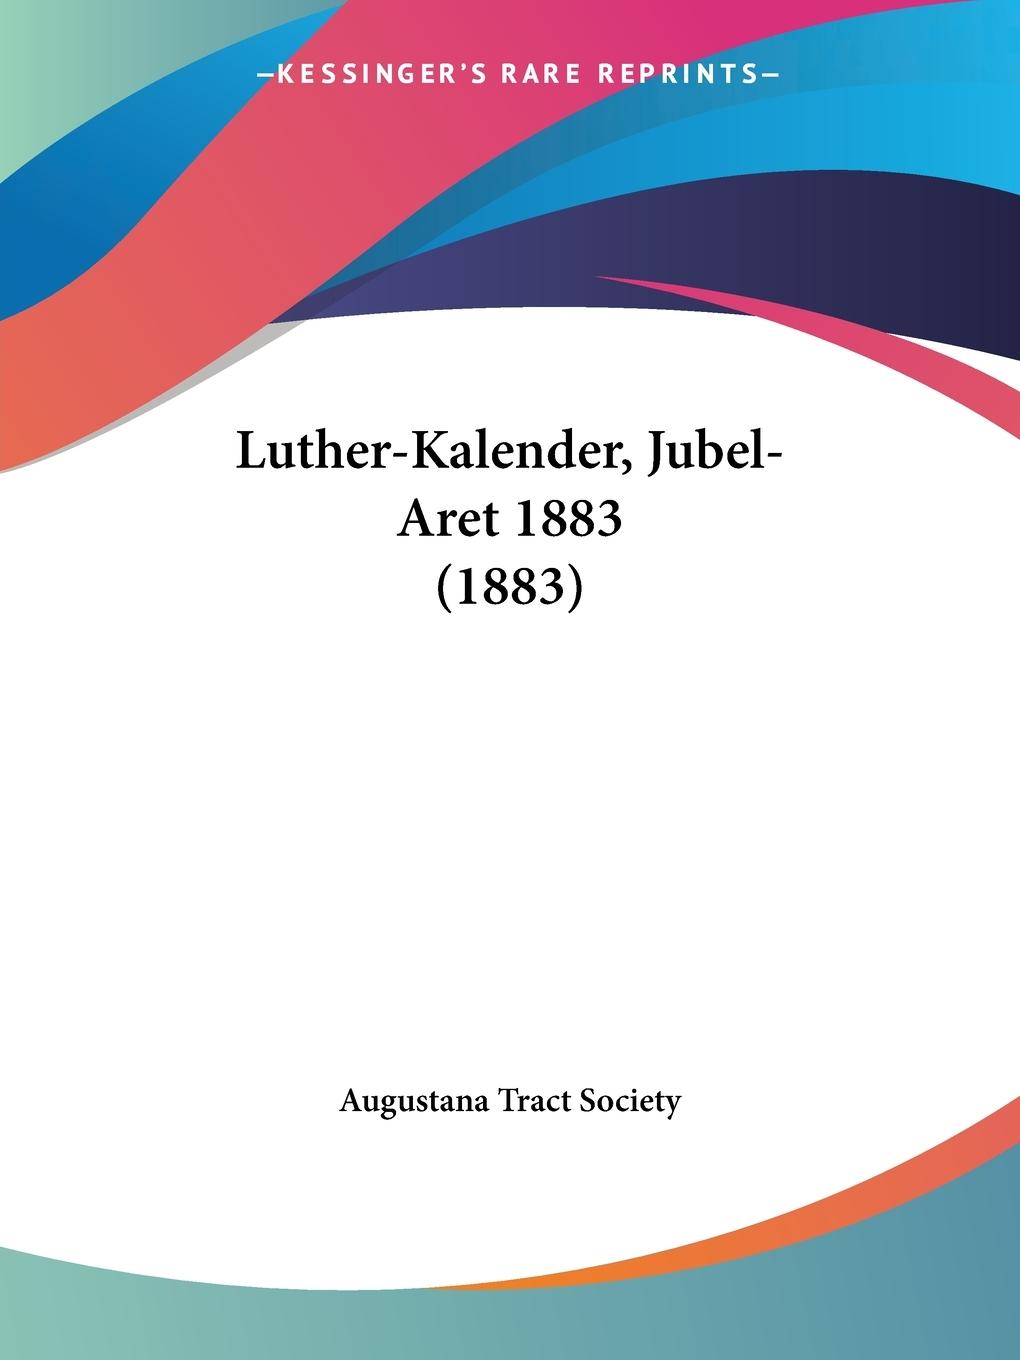 Luther-Kalender, Jubel-Aret 1883 (1883) - Augustana Tract Society